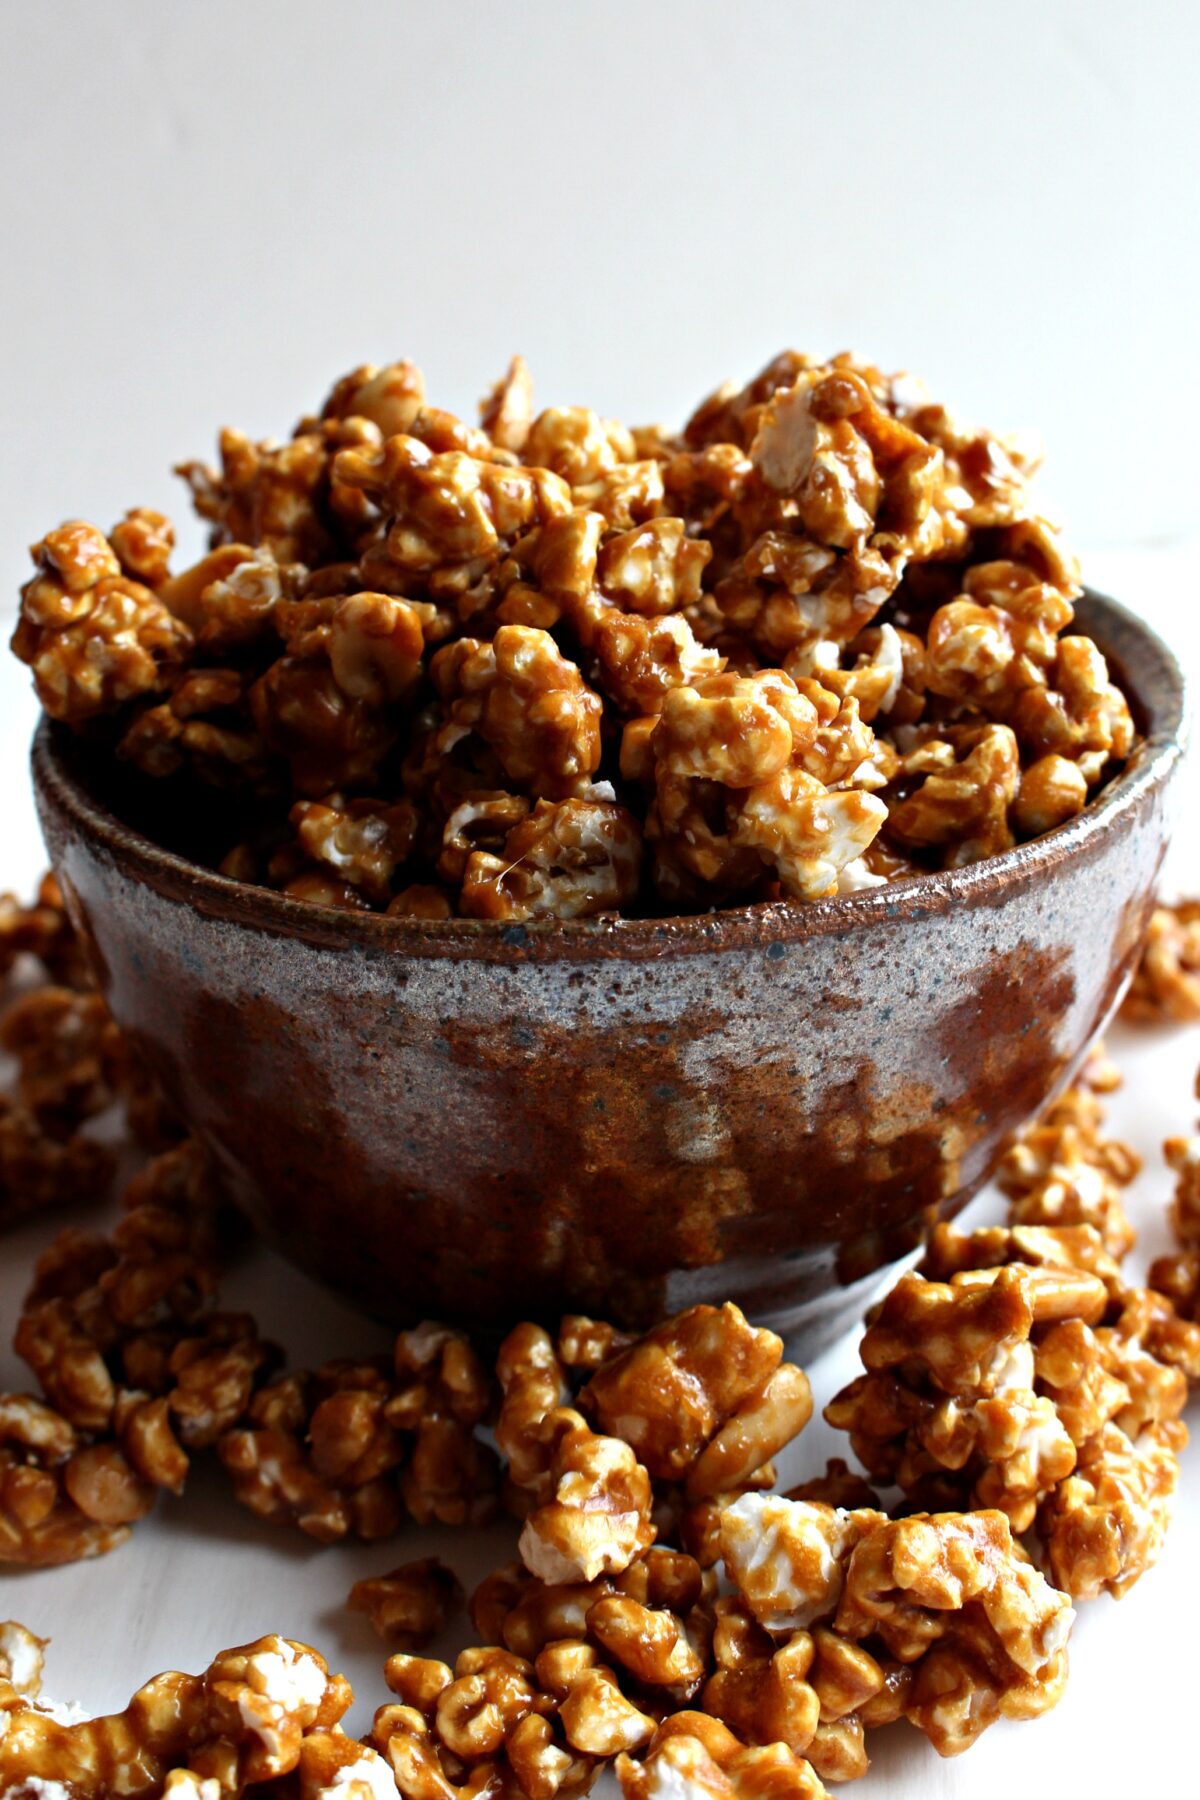 Caramel Popcorn with Peanuts, coated in a shiny, crisp coating, overflowing from a brown pottery serving bowl.